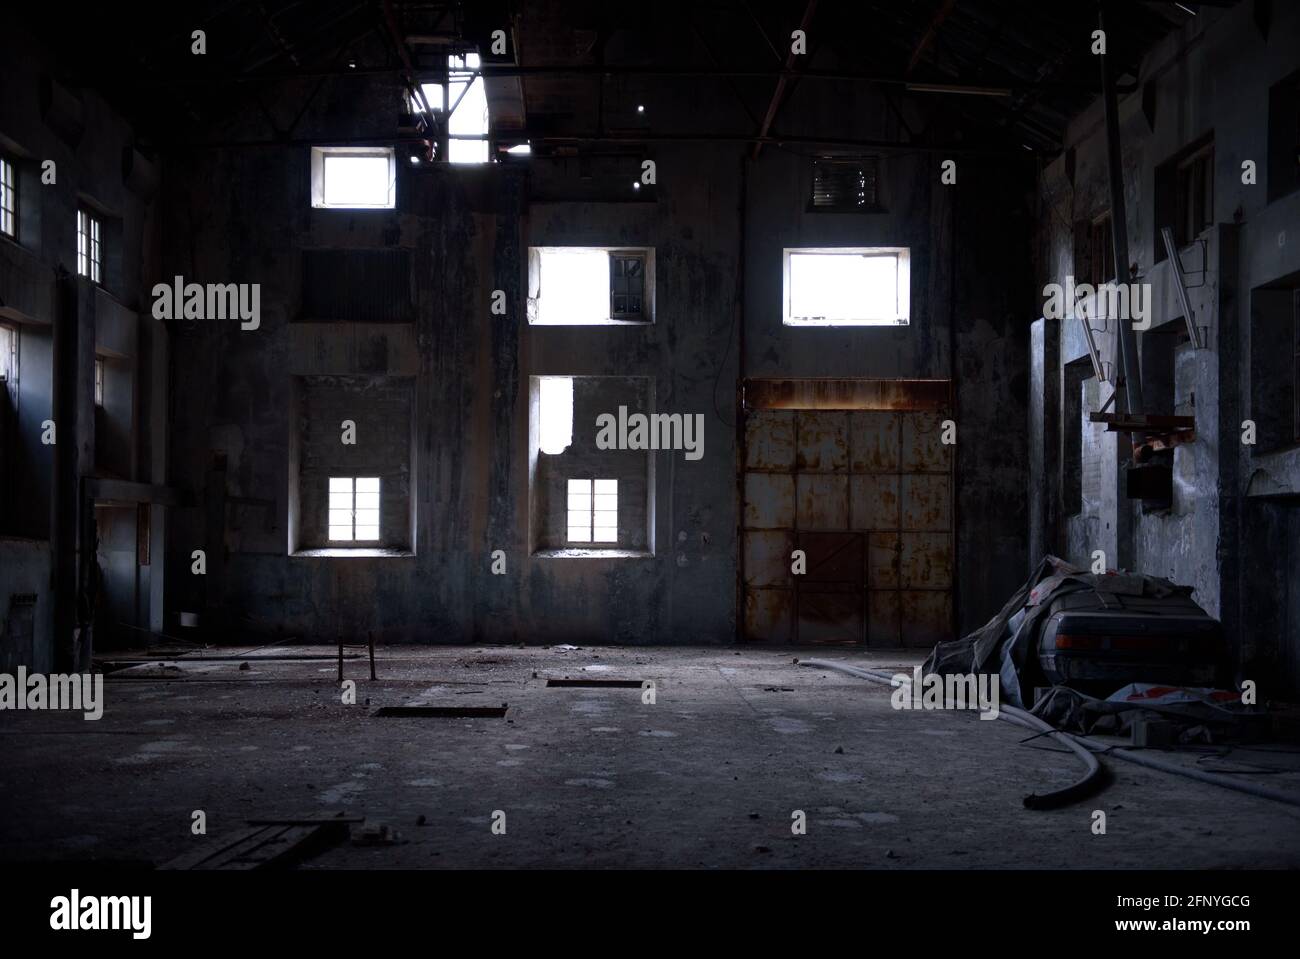 Abandoned industrial backdrop. Old dark warehouse interior with concrete walls, rusty gate and light falling through broken windows Stock Photo